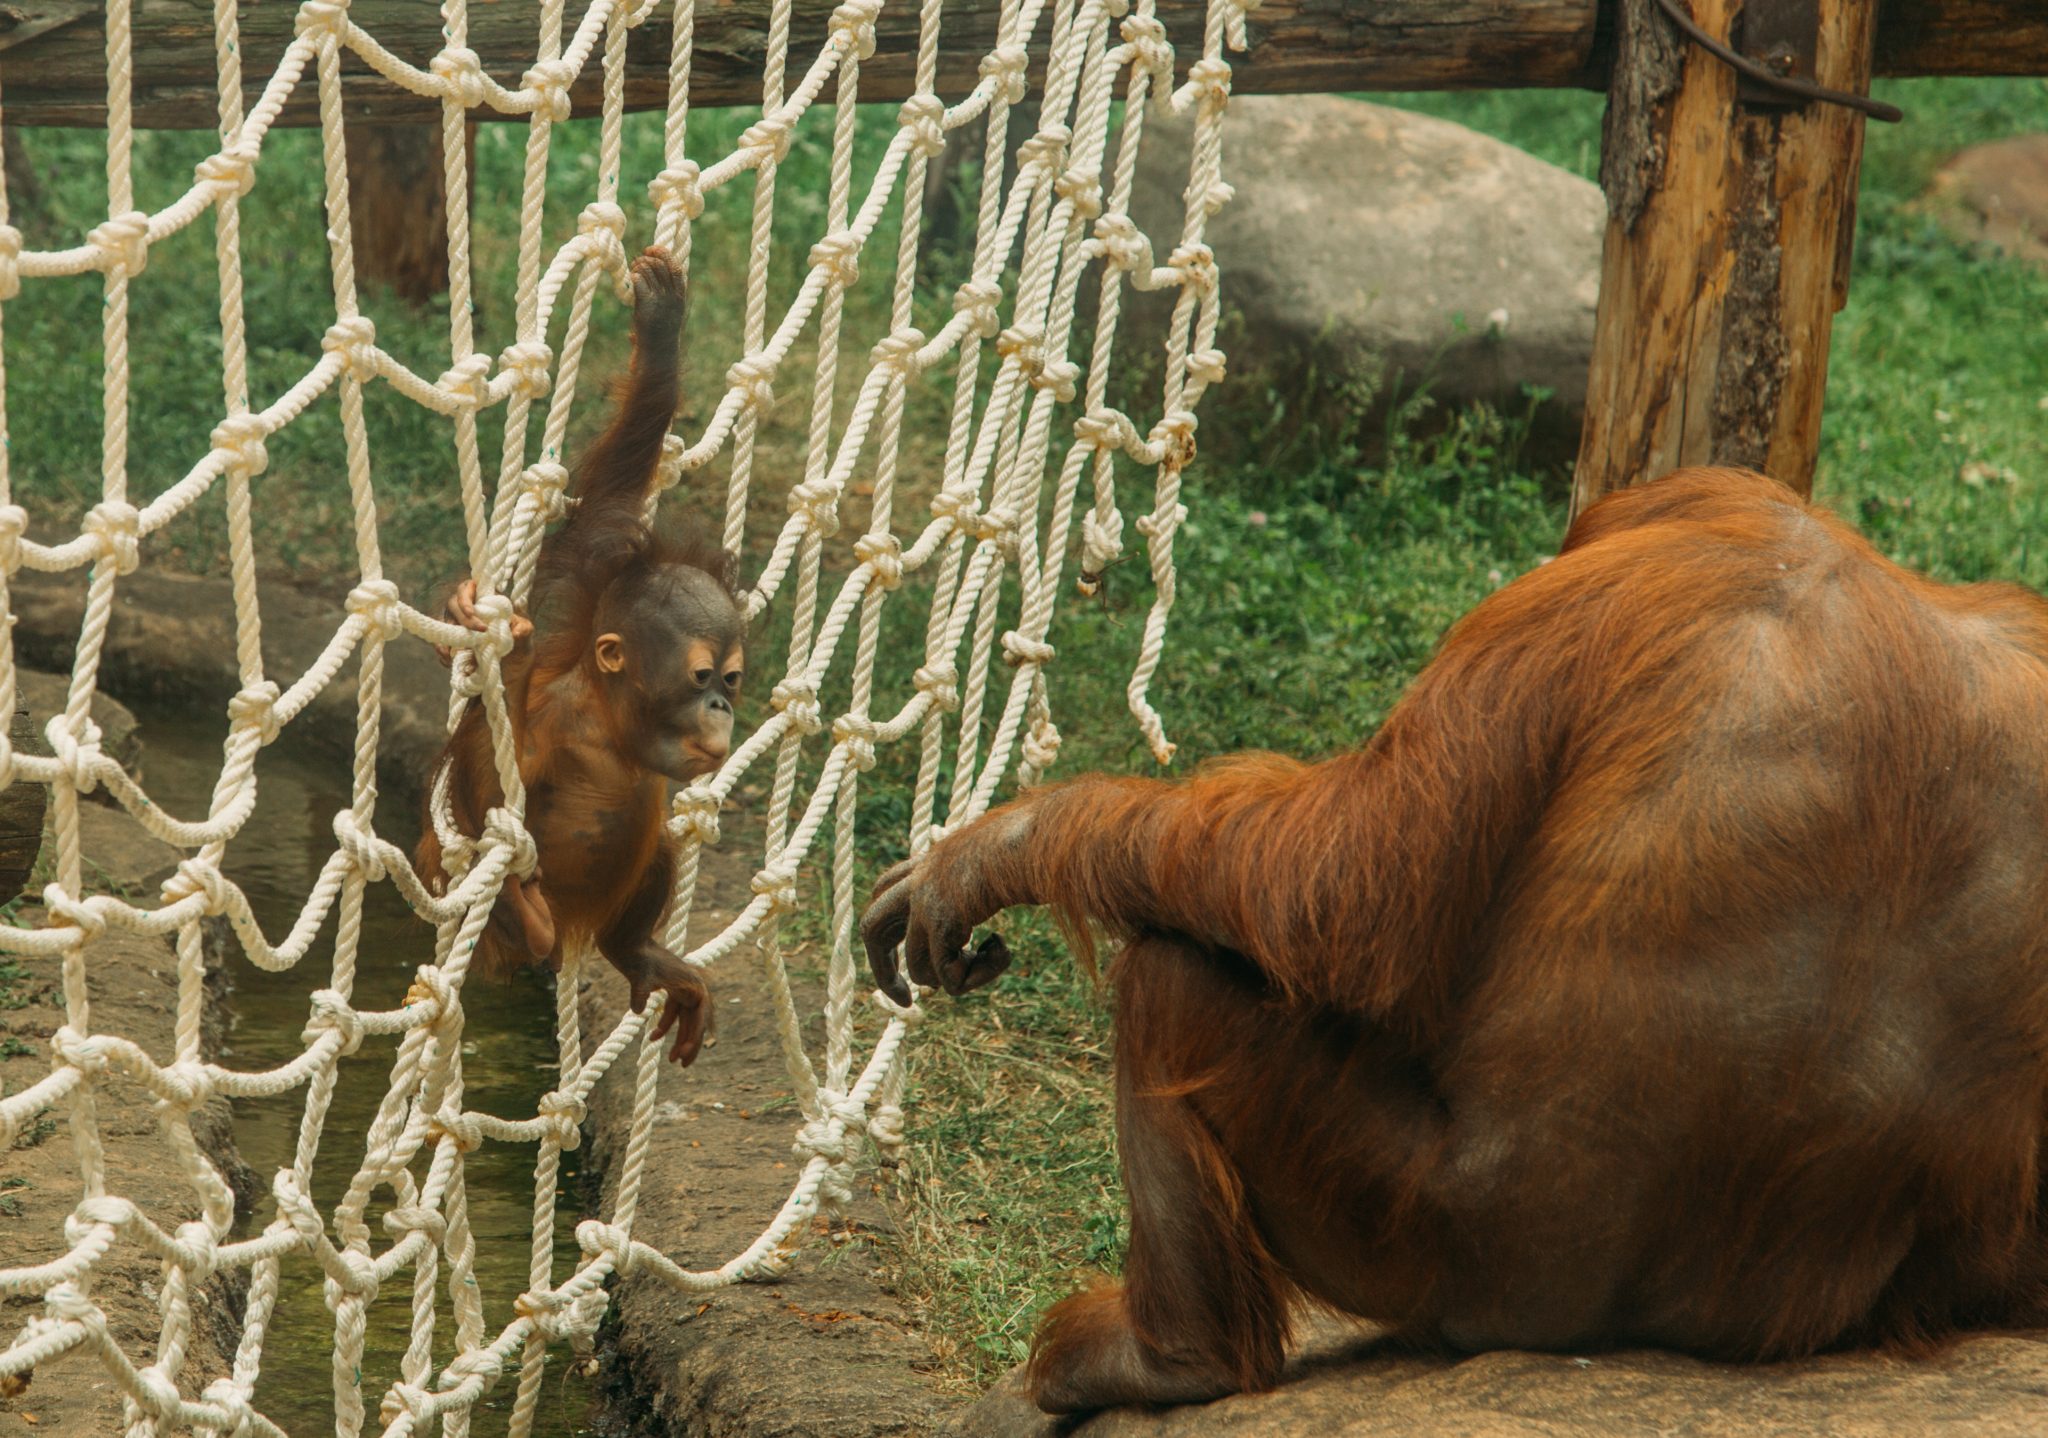 An adorable baby orangutan plays while holding its mother's hand - Moscow zoo in Russia